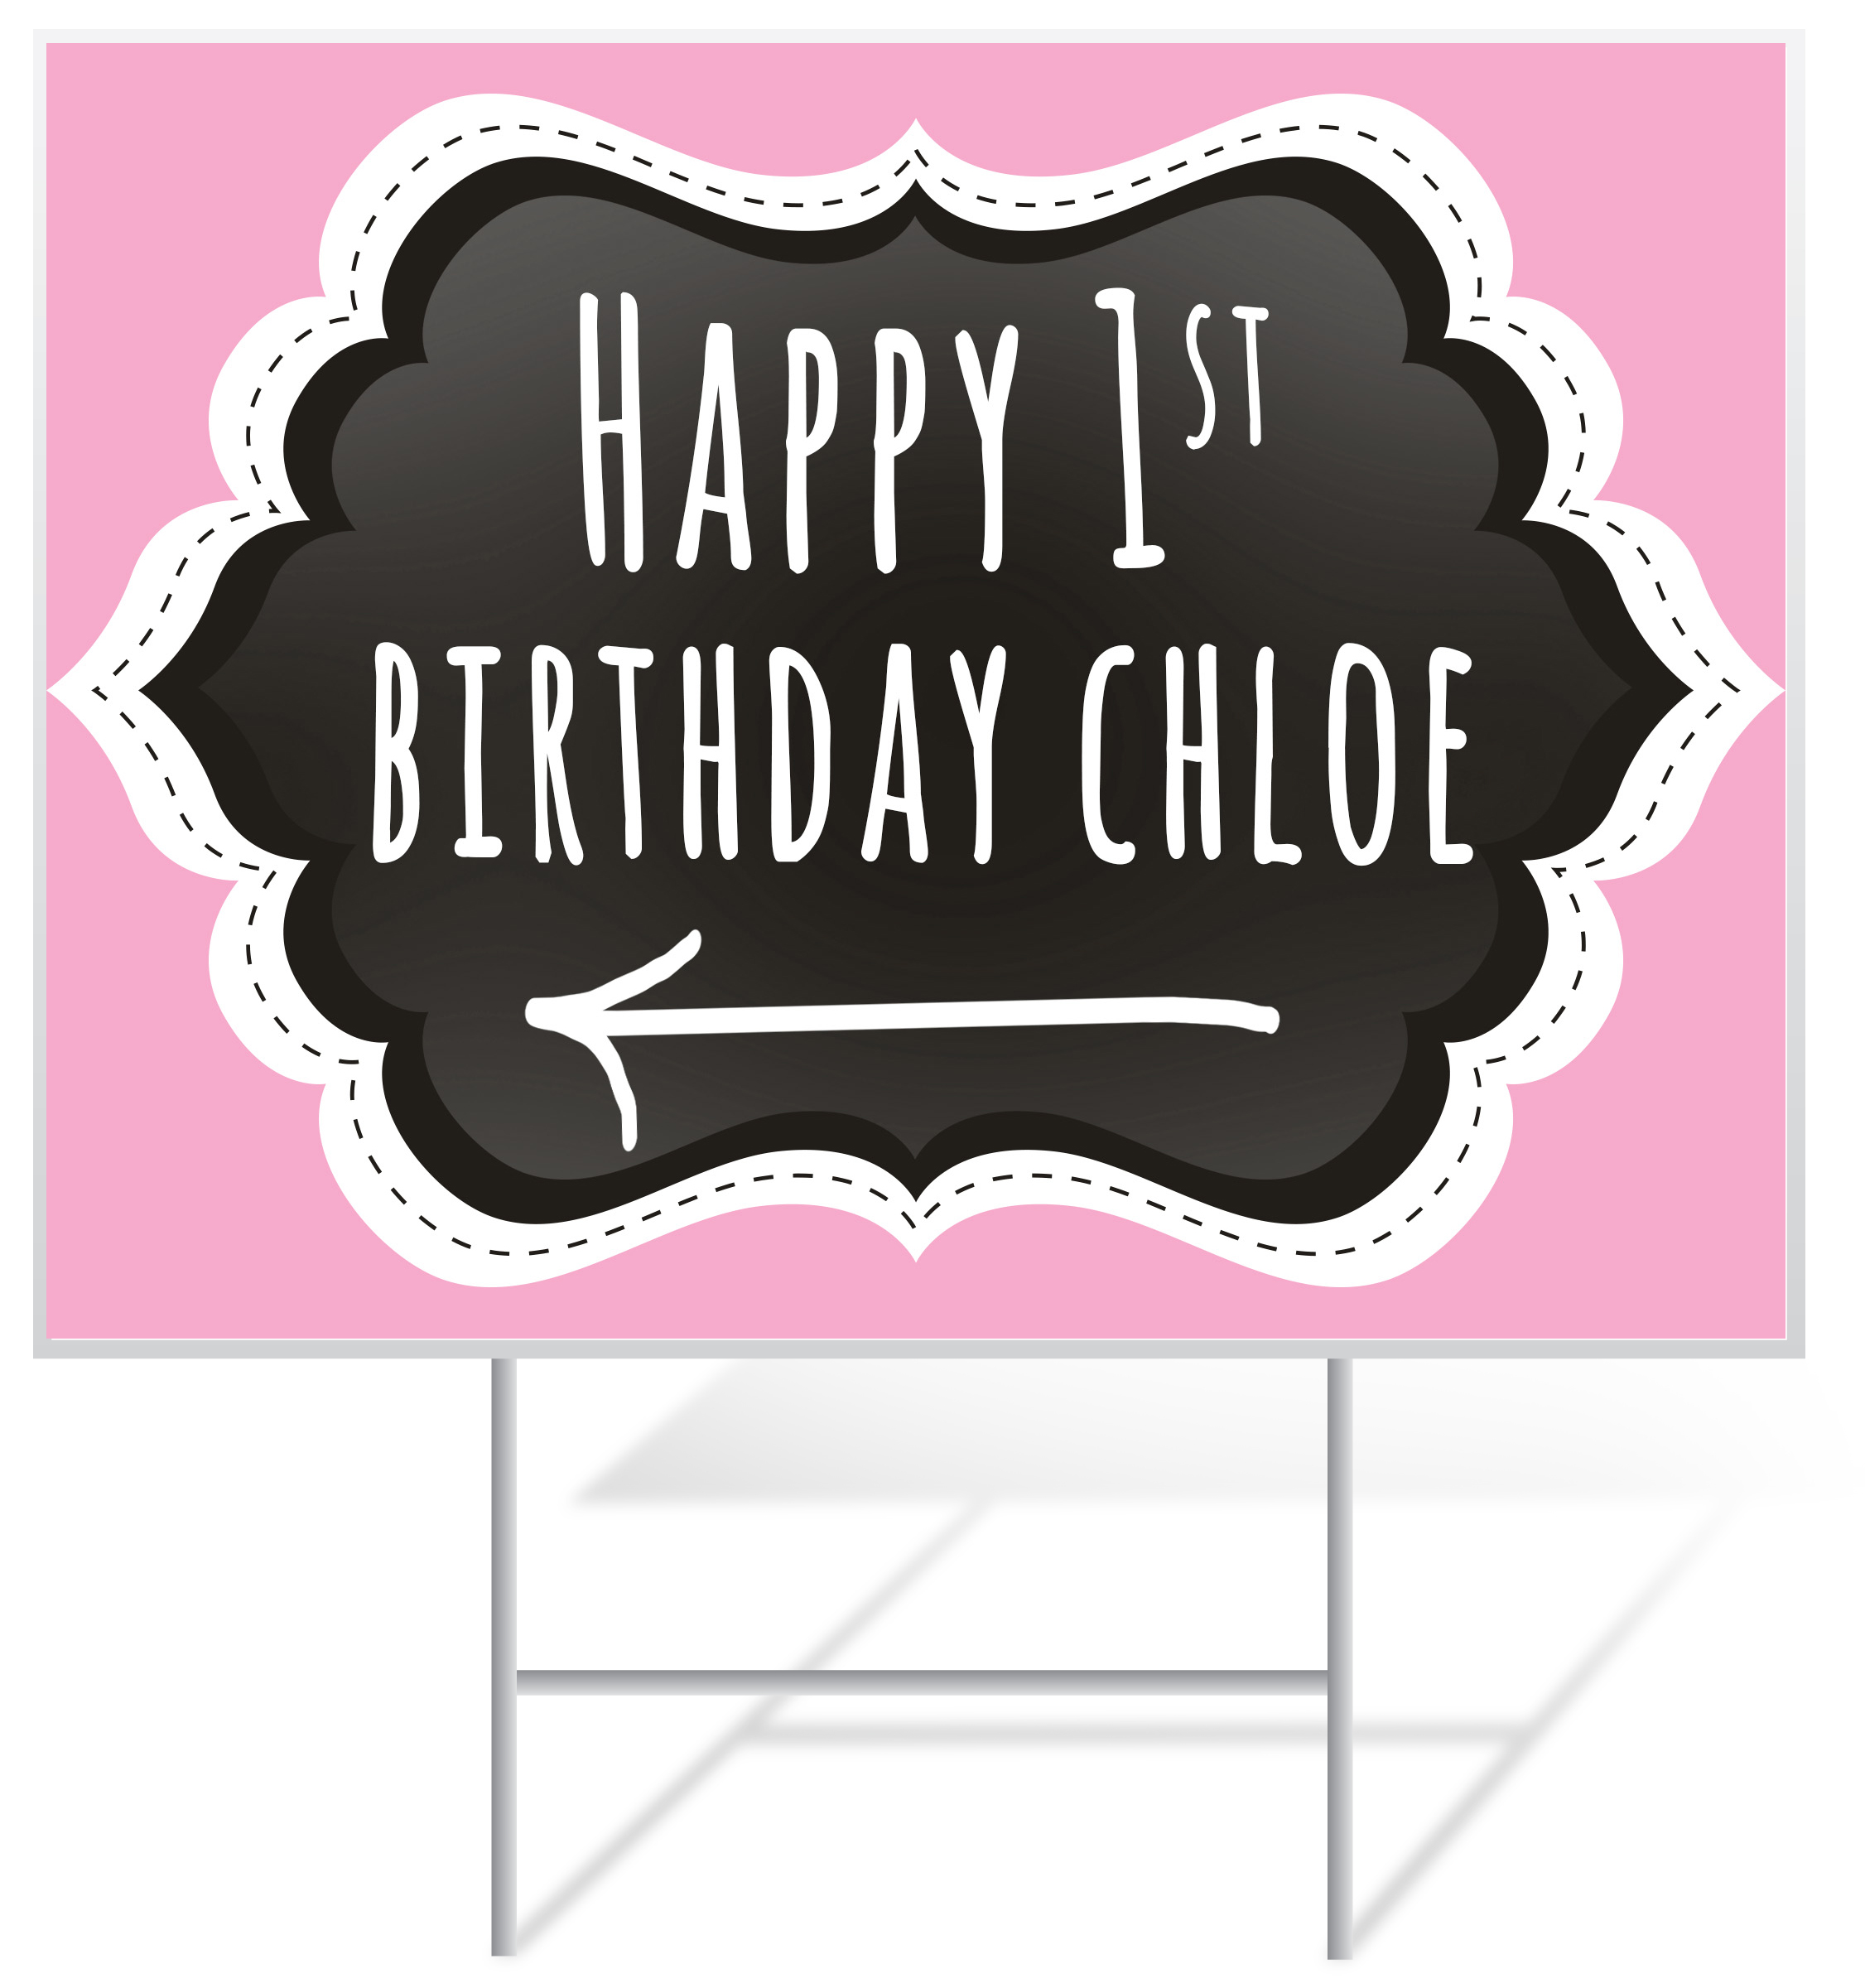 Happy Birthday Lawn Sign Example | LawnSigns.com